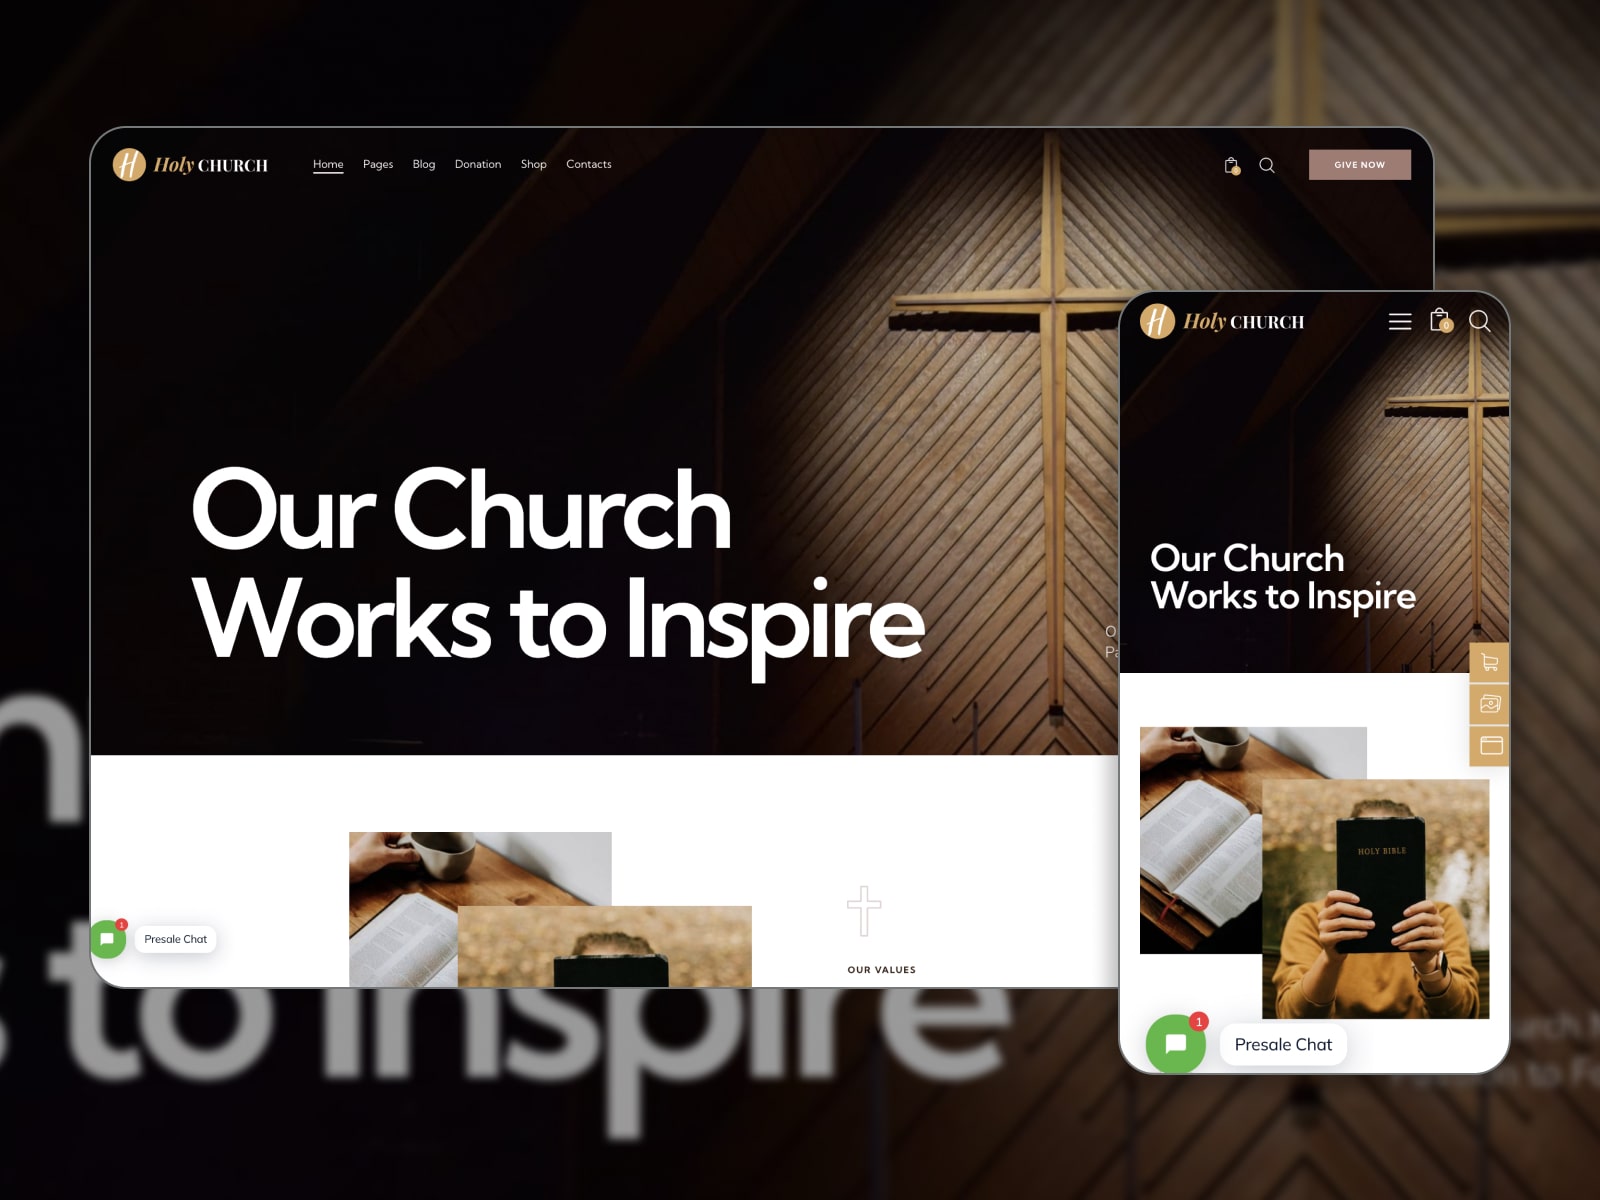 Collage of the Hole Church WordPress theme in brown, black and white colors.